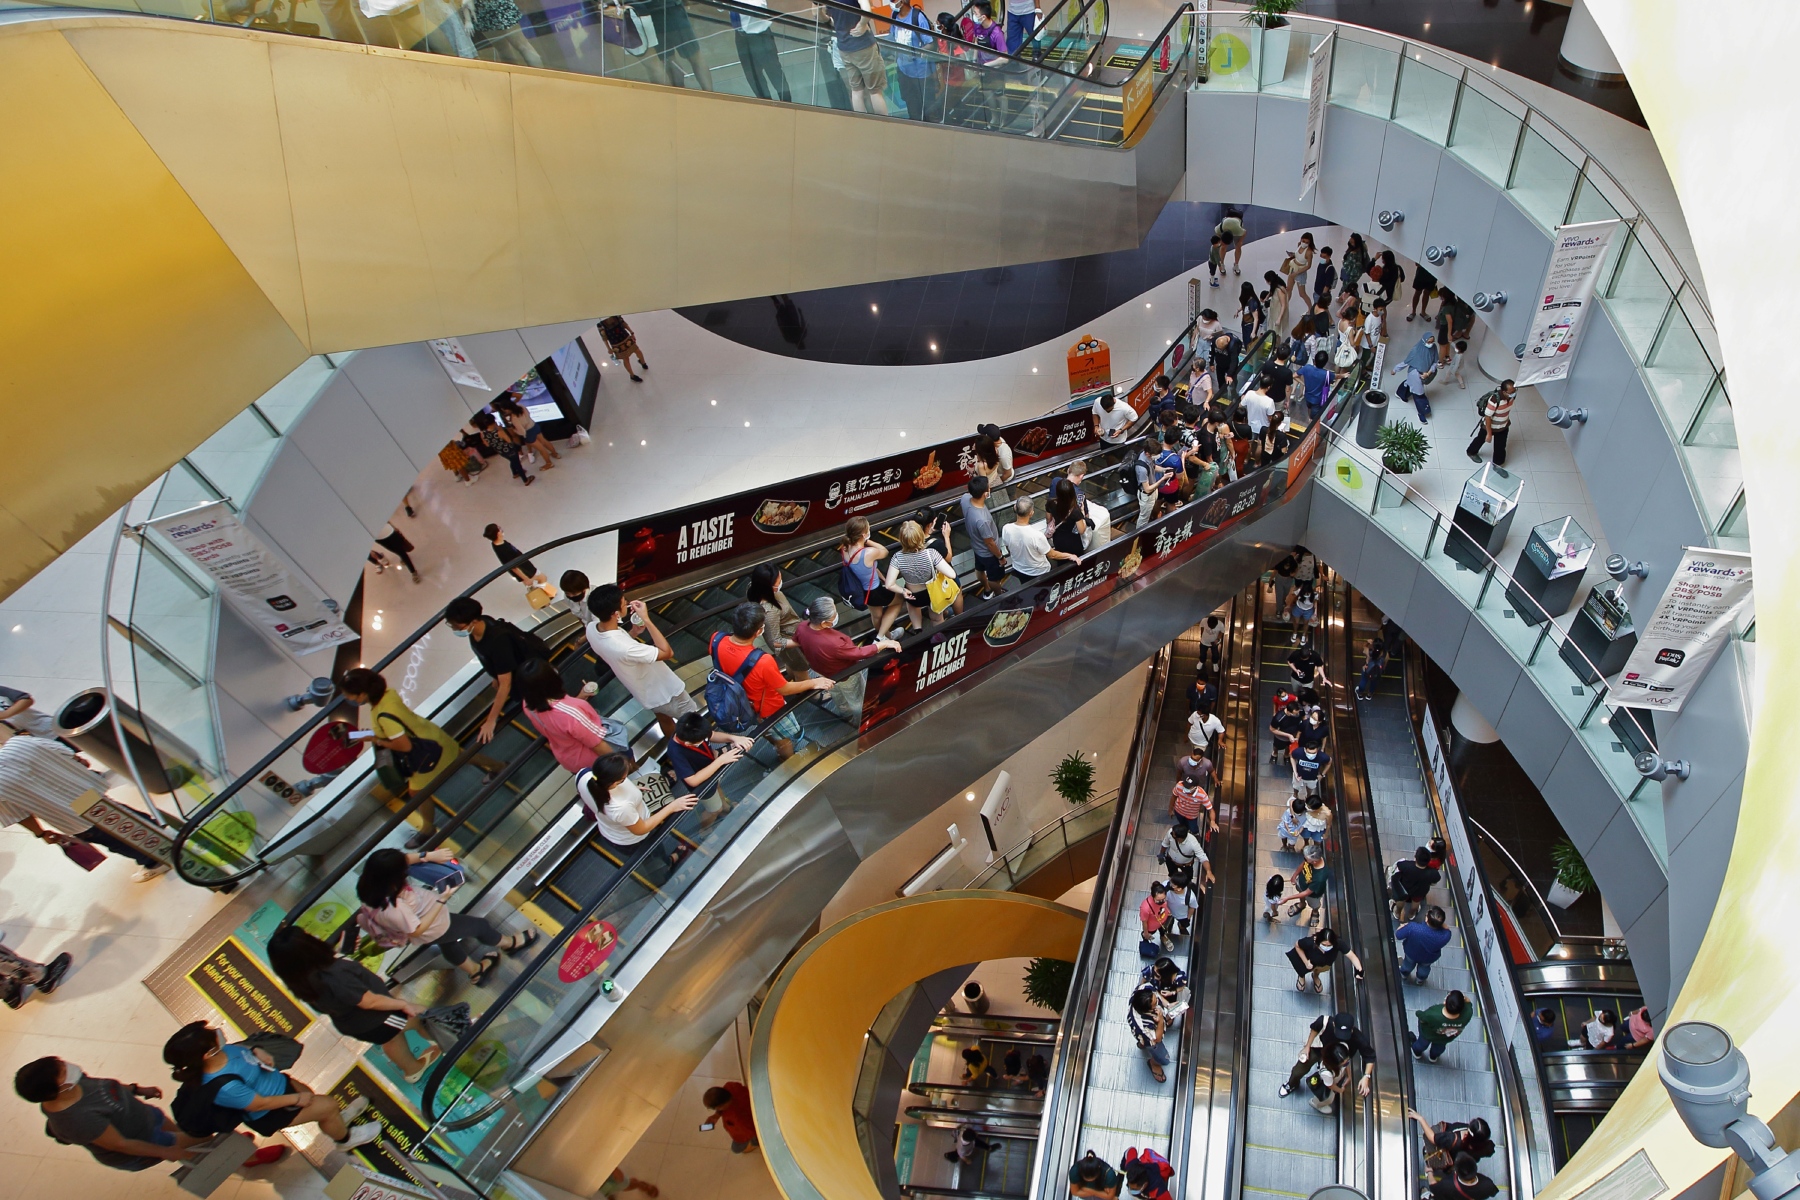 Crowds of people ride an escalator in a shopping mall in Singapore